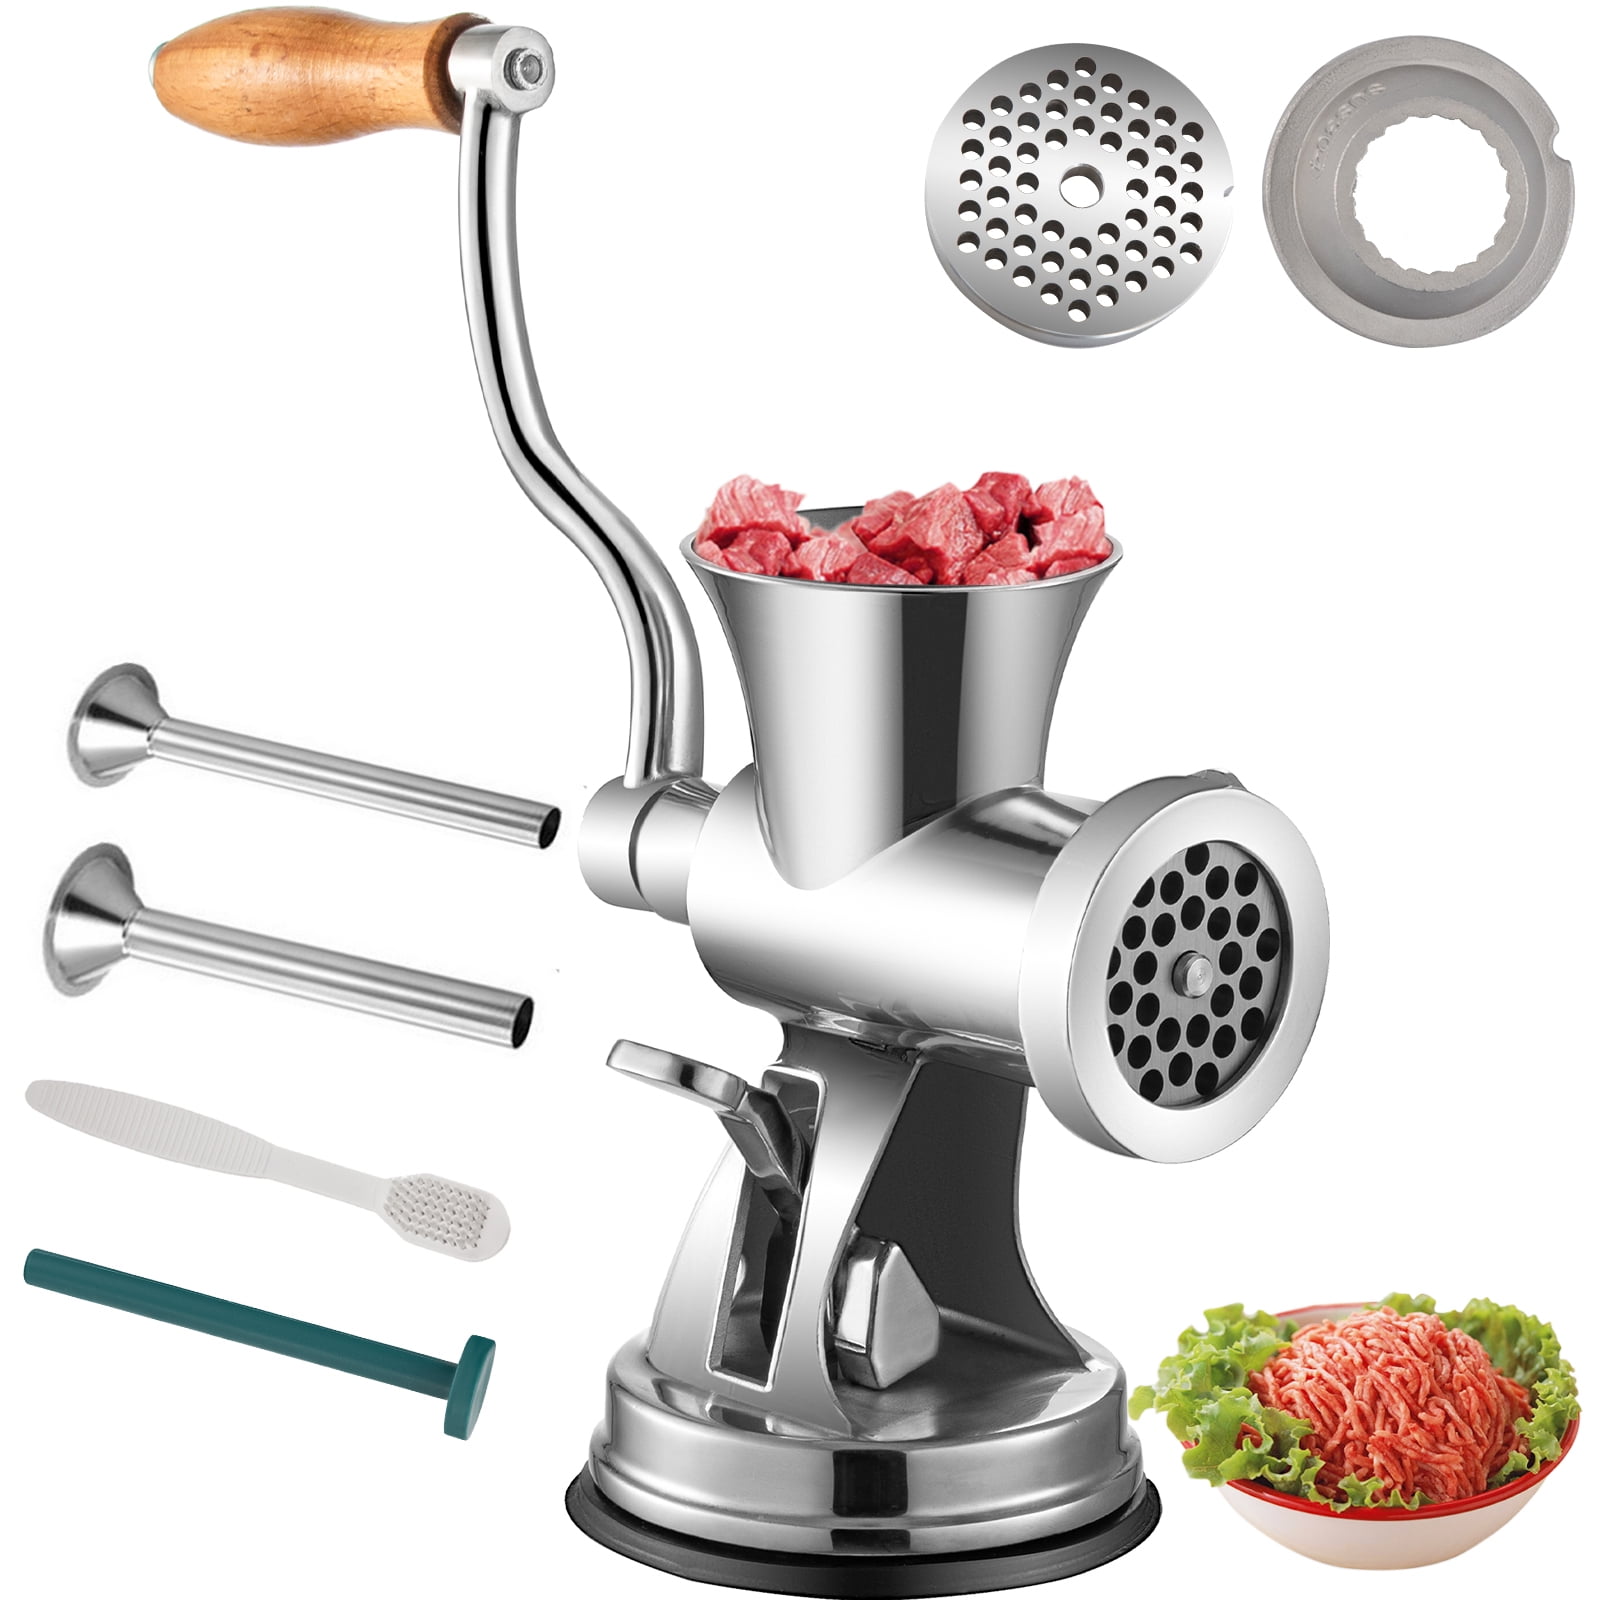 How to Assemble a Manual Meat Grinder